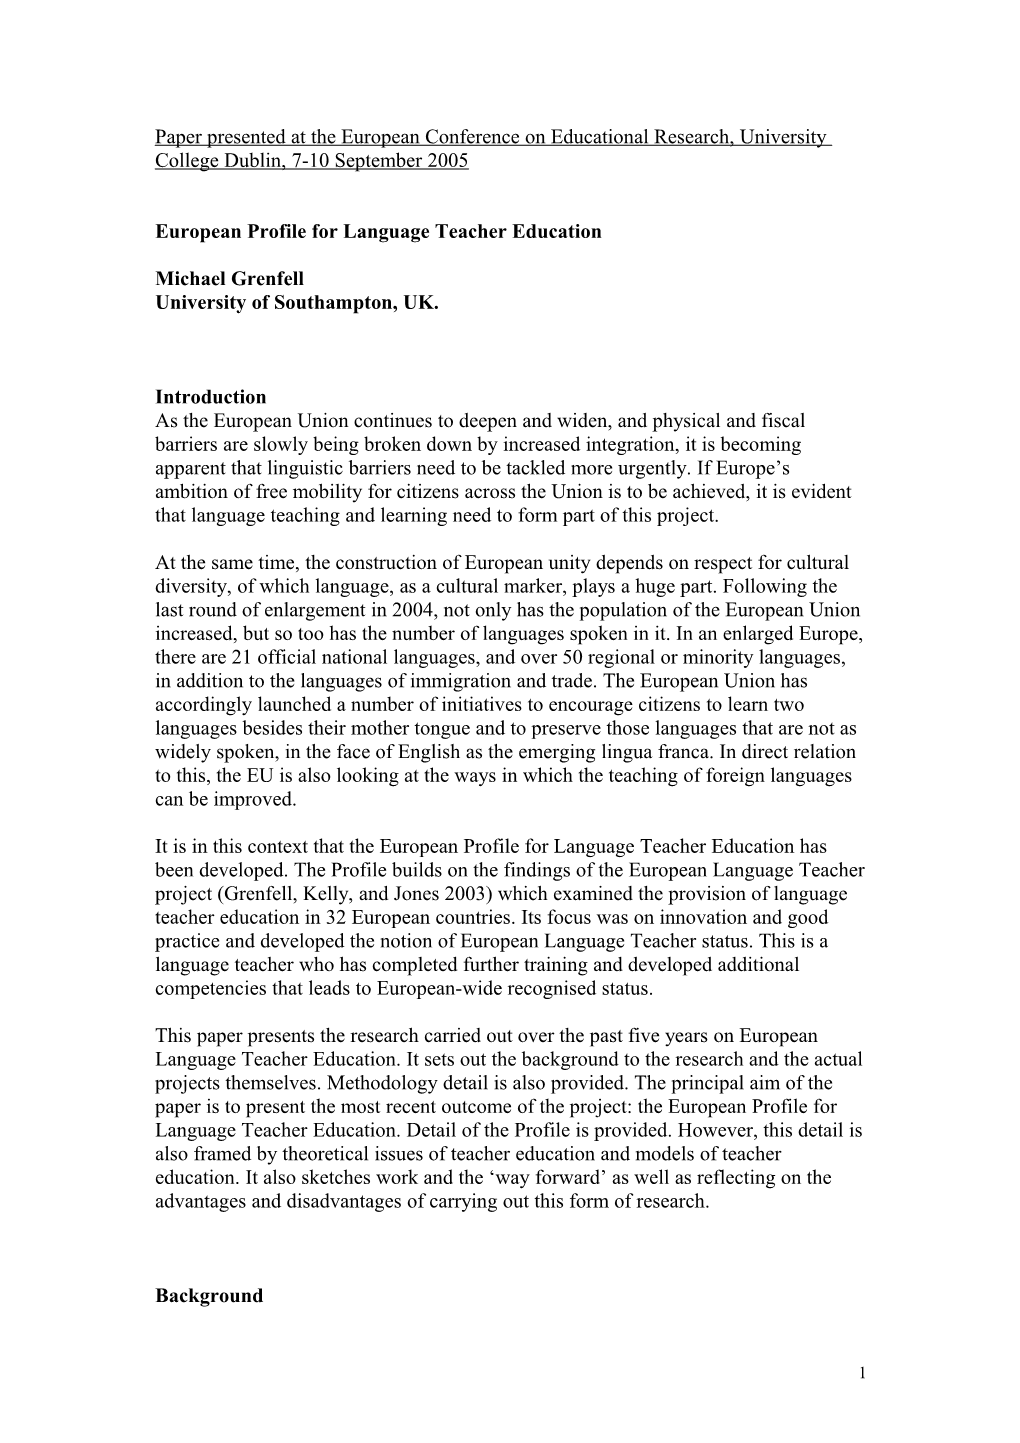 The Training of Foreign Language Teachers: Developments in Europe